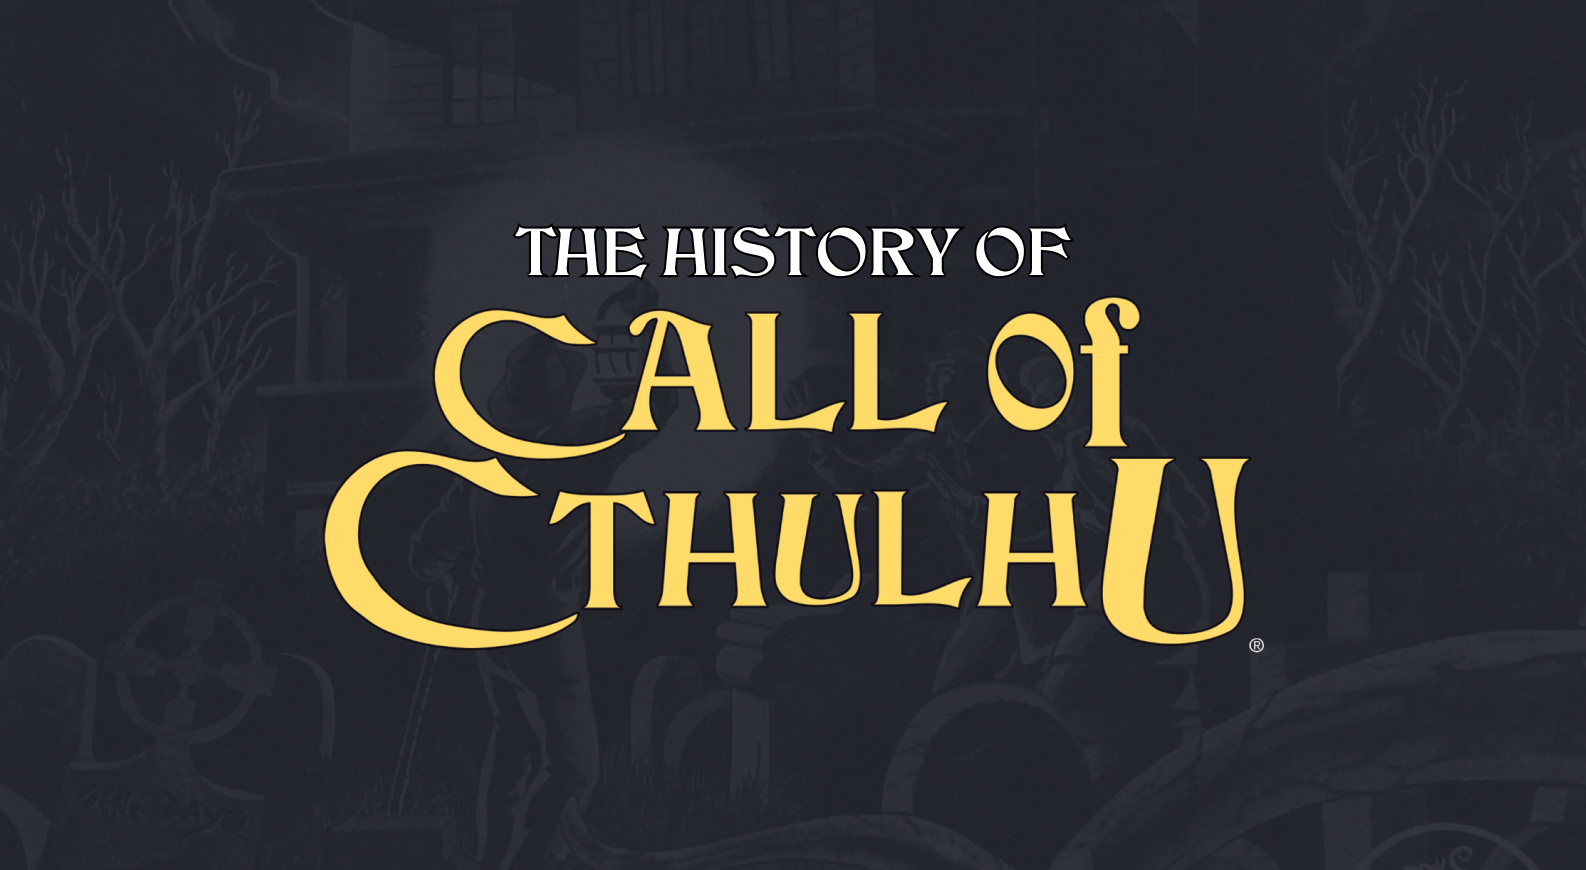 The history of Call of Cthulhu